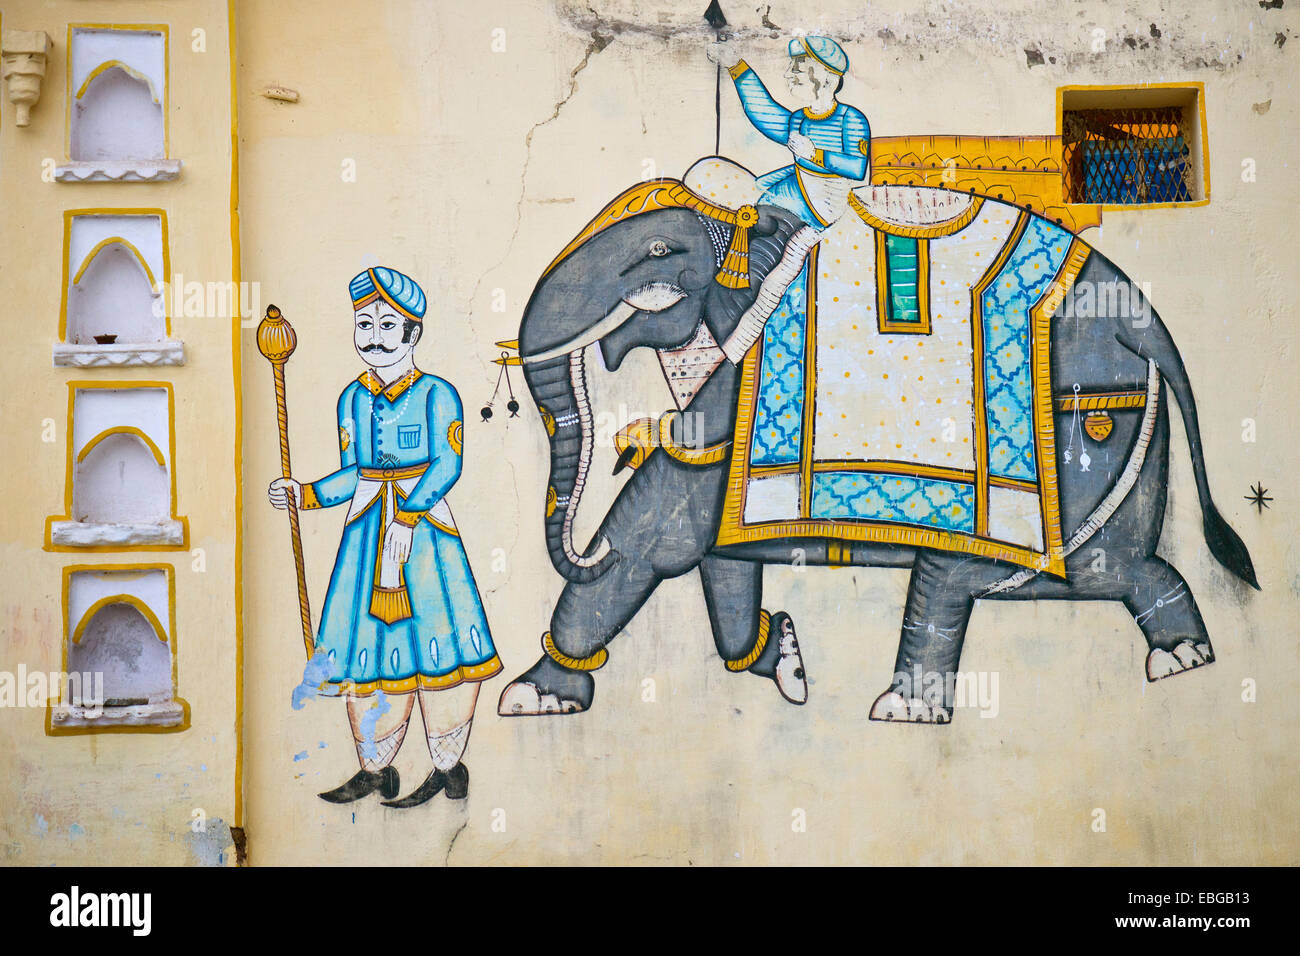 Mural on a house wall, elephant with mahout and palace servant, Bassi, Rajasthan, India Stock Photo